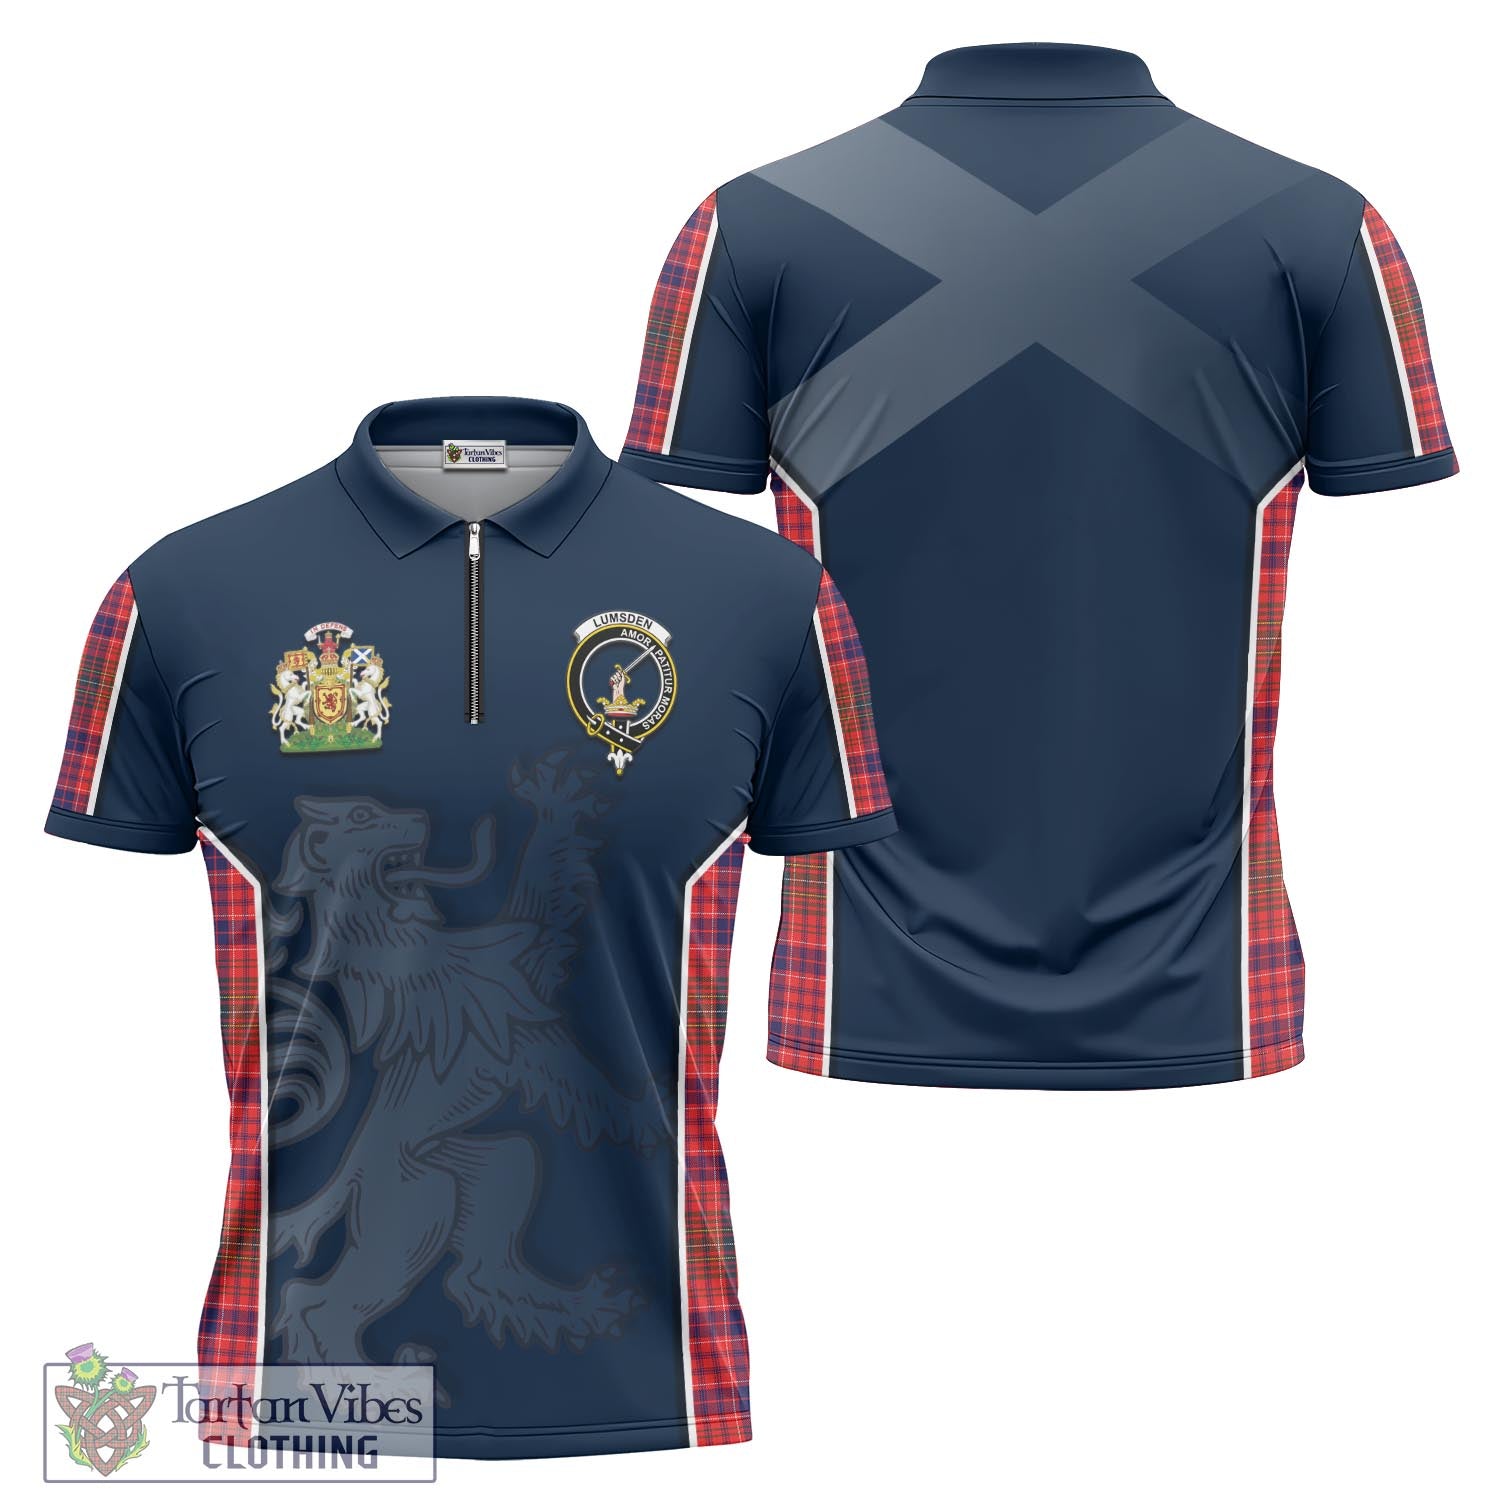 Tartan Vibes Clothing Lumsden Modern Tartan Zipper Polo Shirt with Family Crest and Lion Rampant Vibes Sport Style